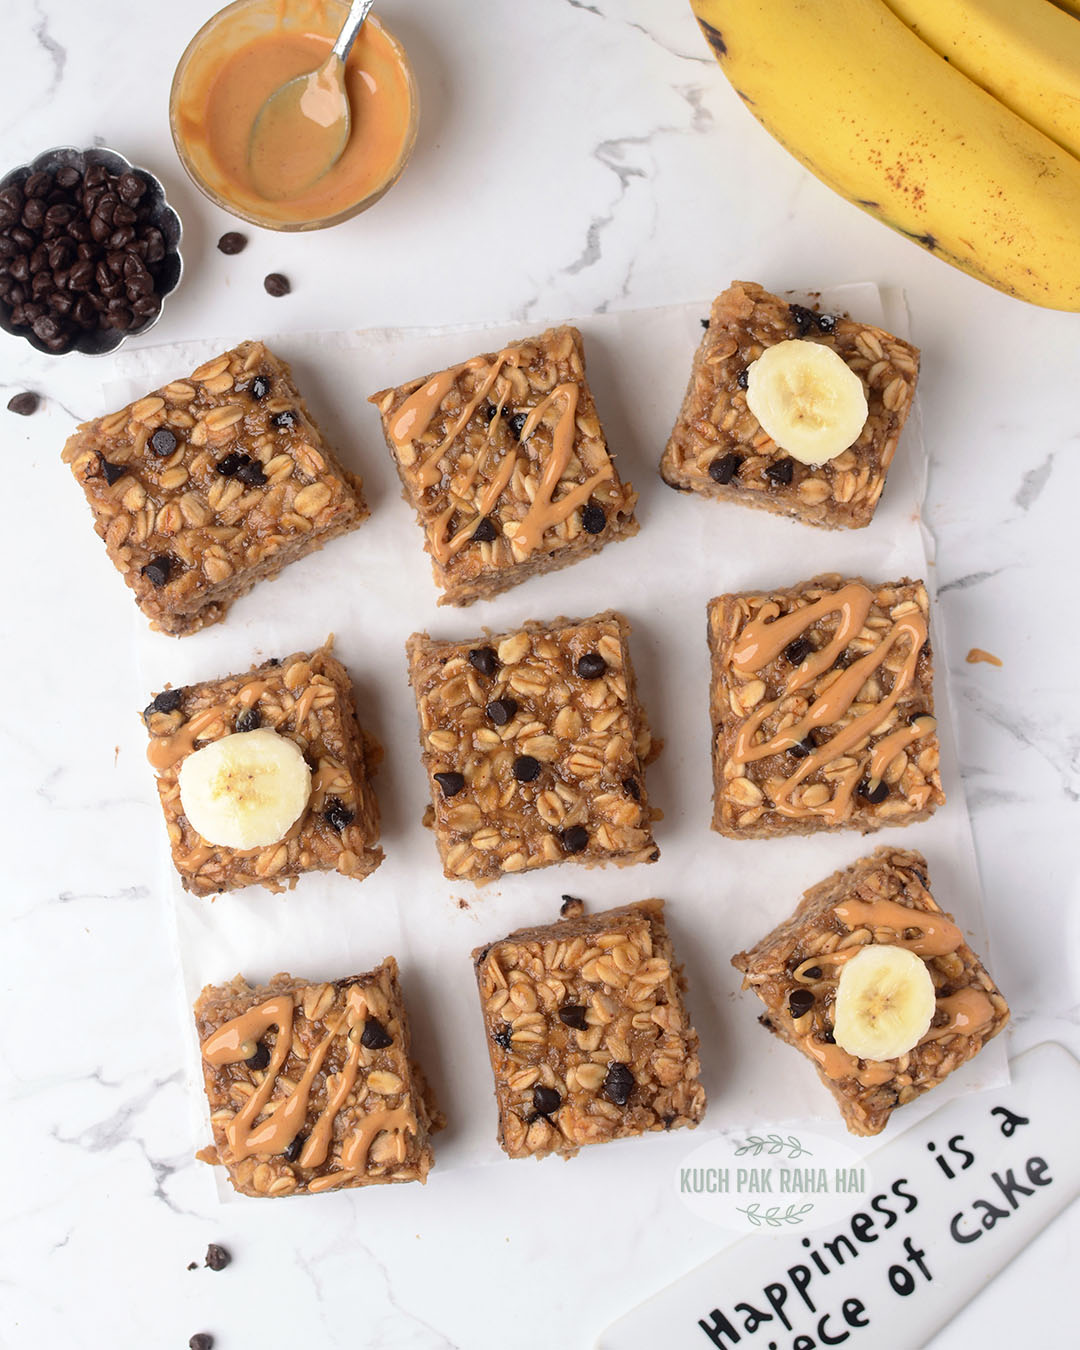 Banana peanut butter oatmeal bars with chocolate chips.